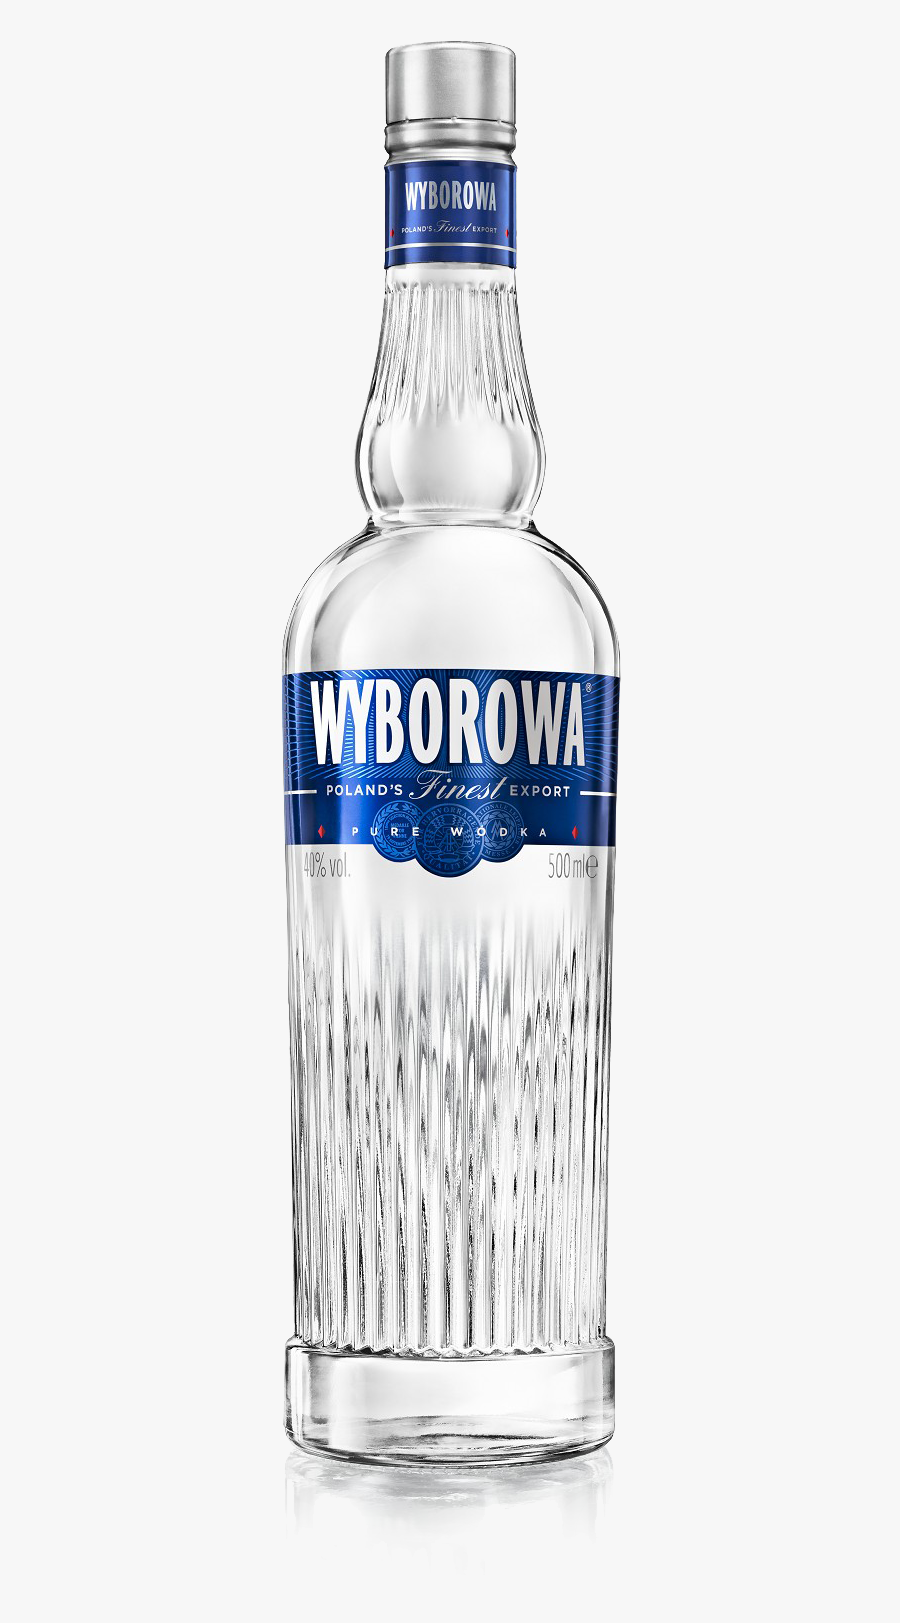 For Free Download - Vodka Wyborowa Png, Transparent Clipart